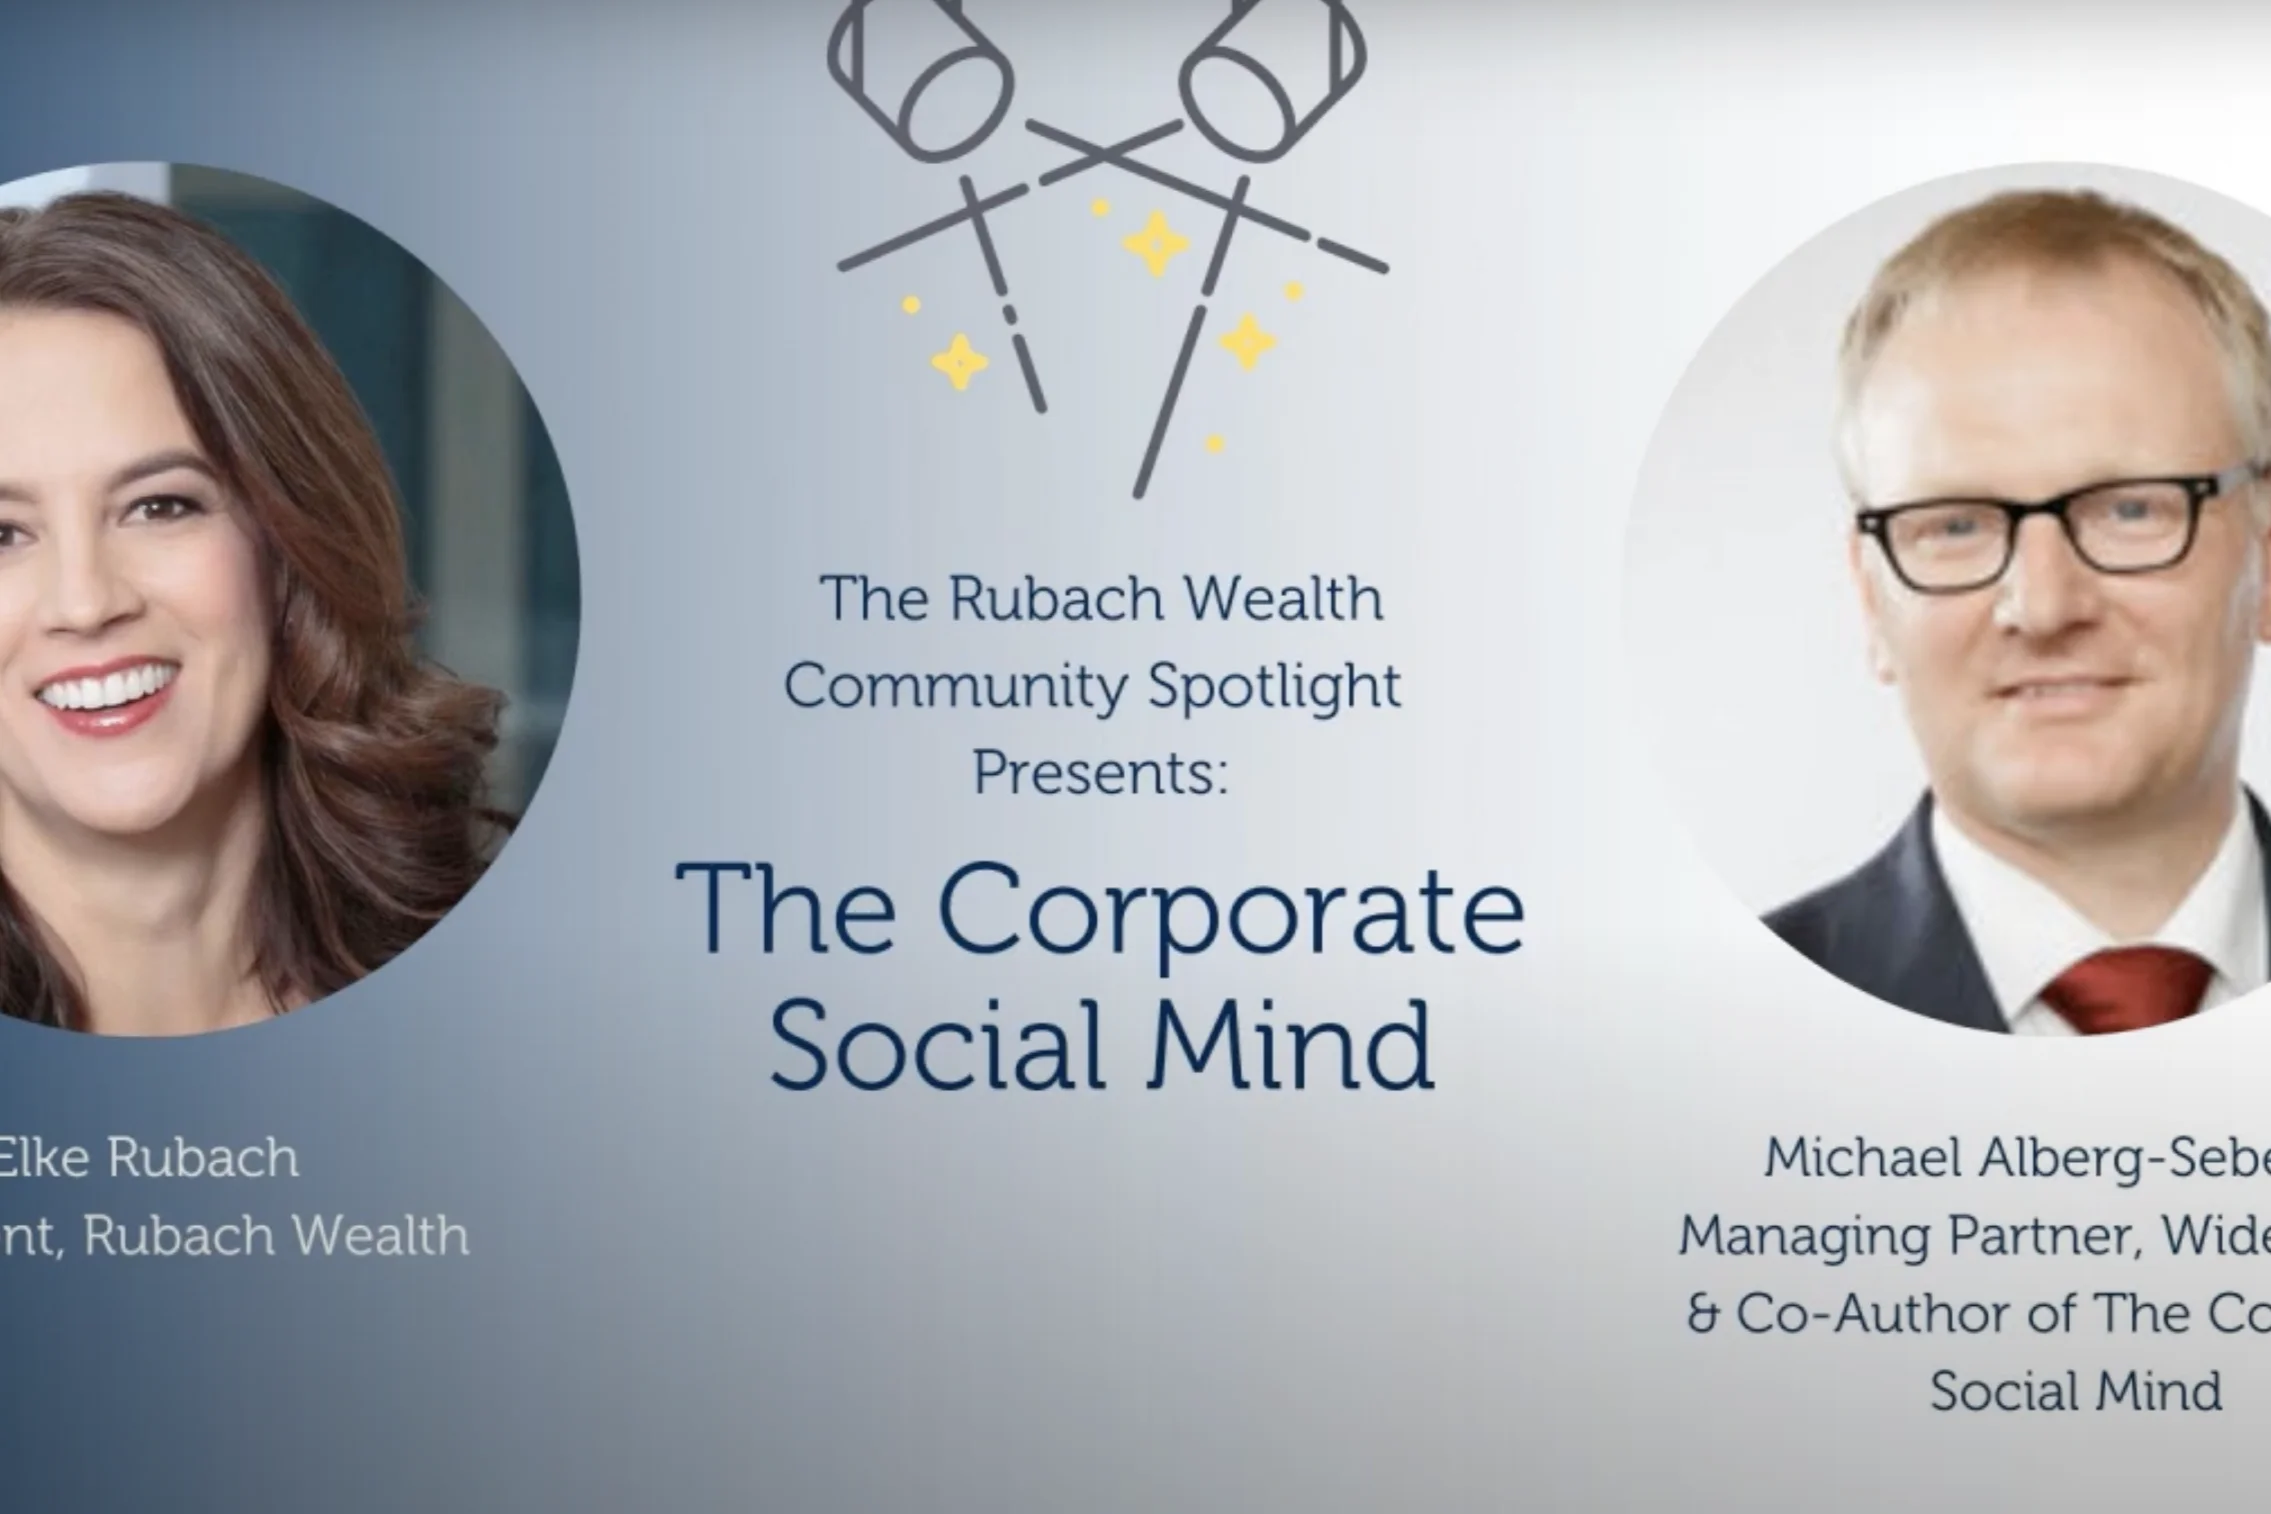 The Corporate Social Mind - A New Take on Corporate Social Responsibility During COVID-19